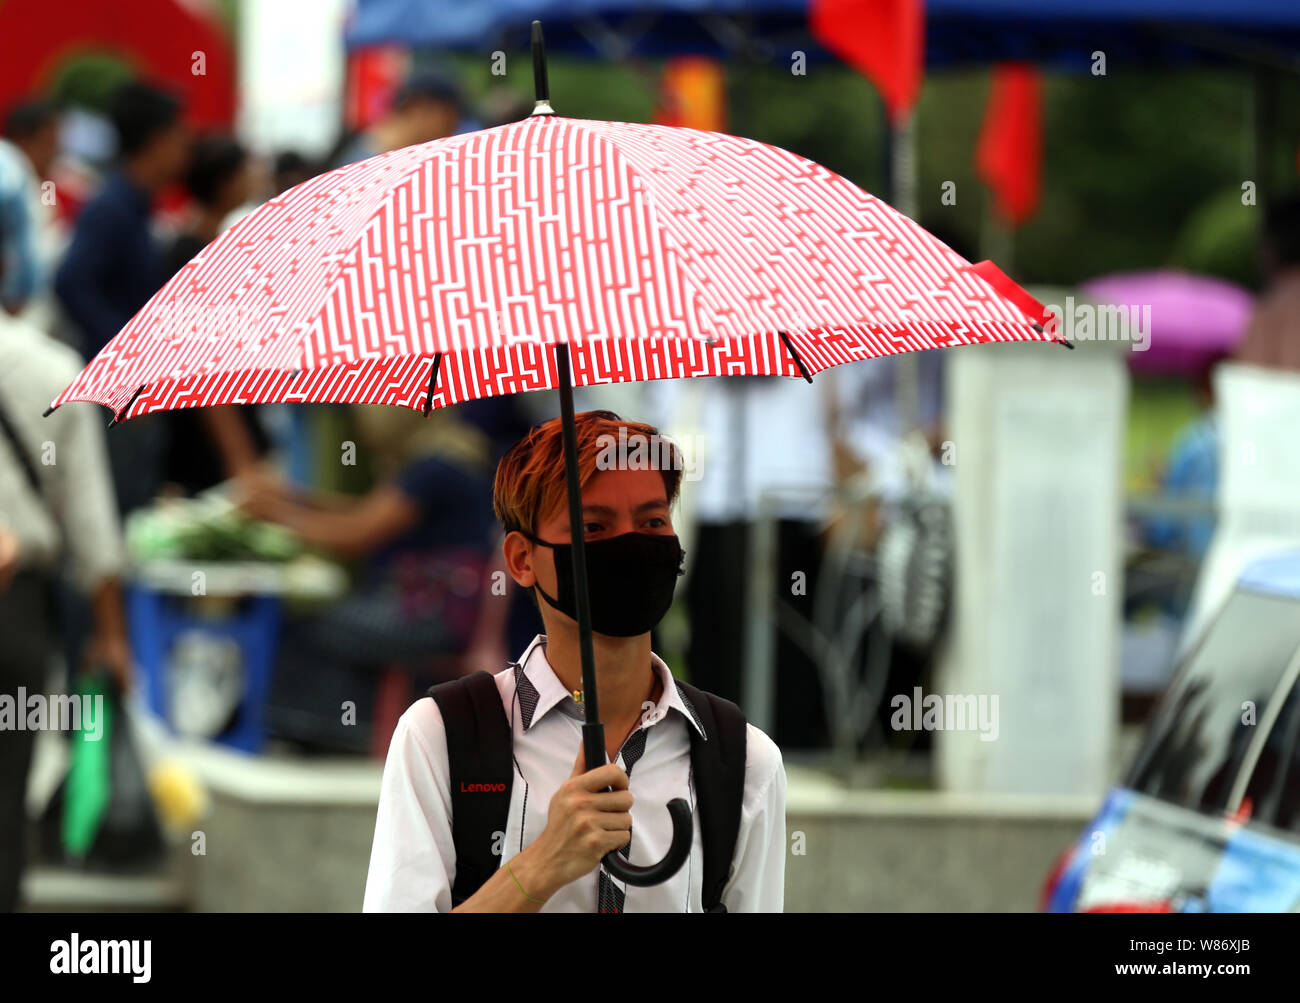 (190808) -- YANGON, Aug. 8, 2019 (Xinhua) -- A man wearing a mask is seen in downtown Yangon, Myanmar, Aug. 8, 2019. Death toll of influenza A (H1N1) pdm09 rose to 90 in Myanmar as of Wednesday, according to the figures released by the Public Health Department under the Ministry of Health and Sports. (Xinhua/U Aung) Stock Photo